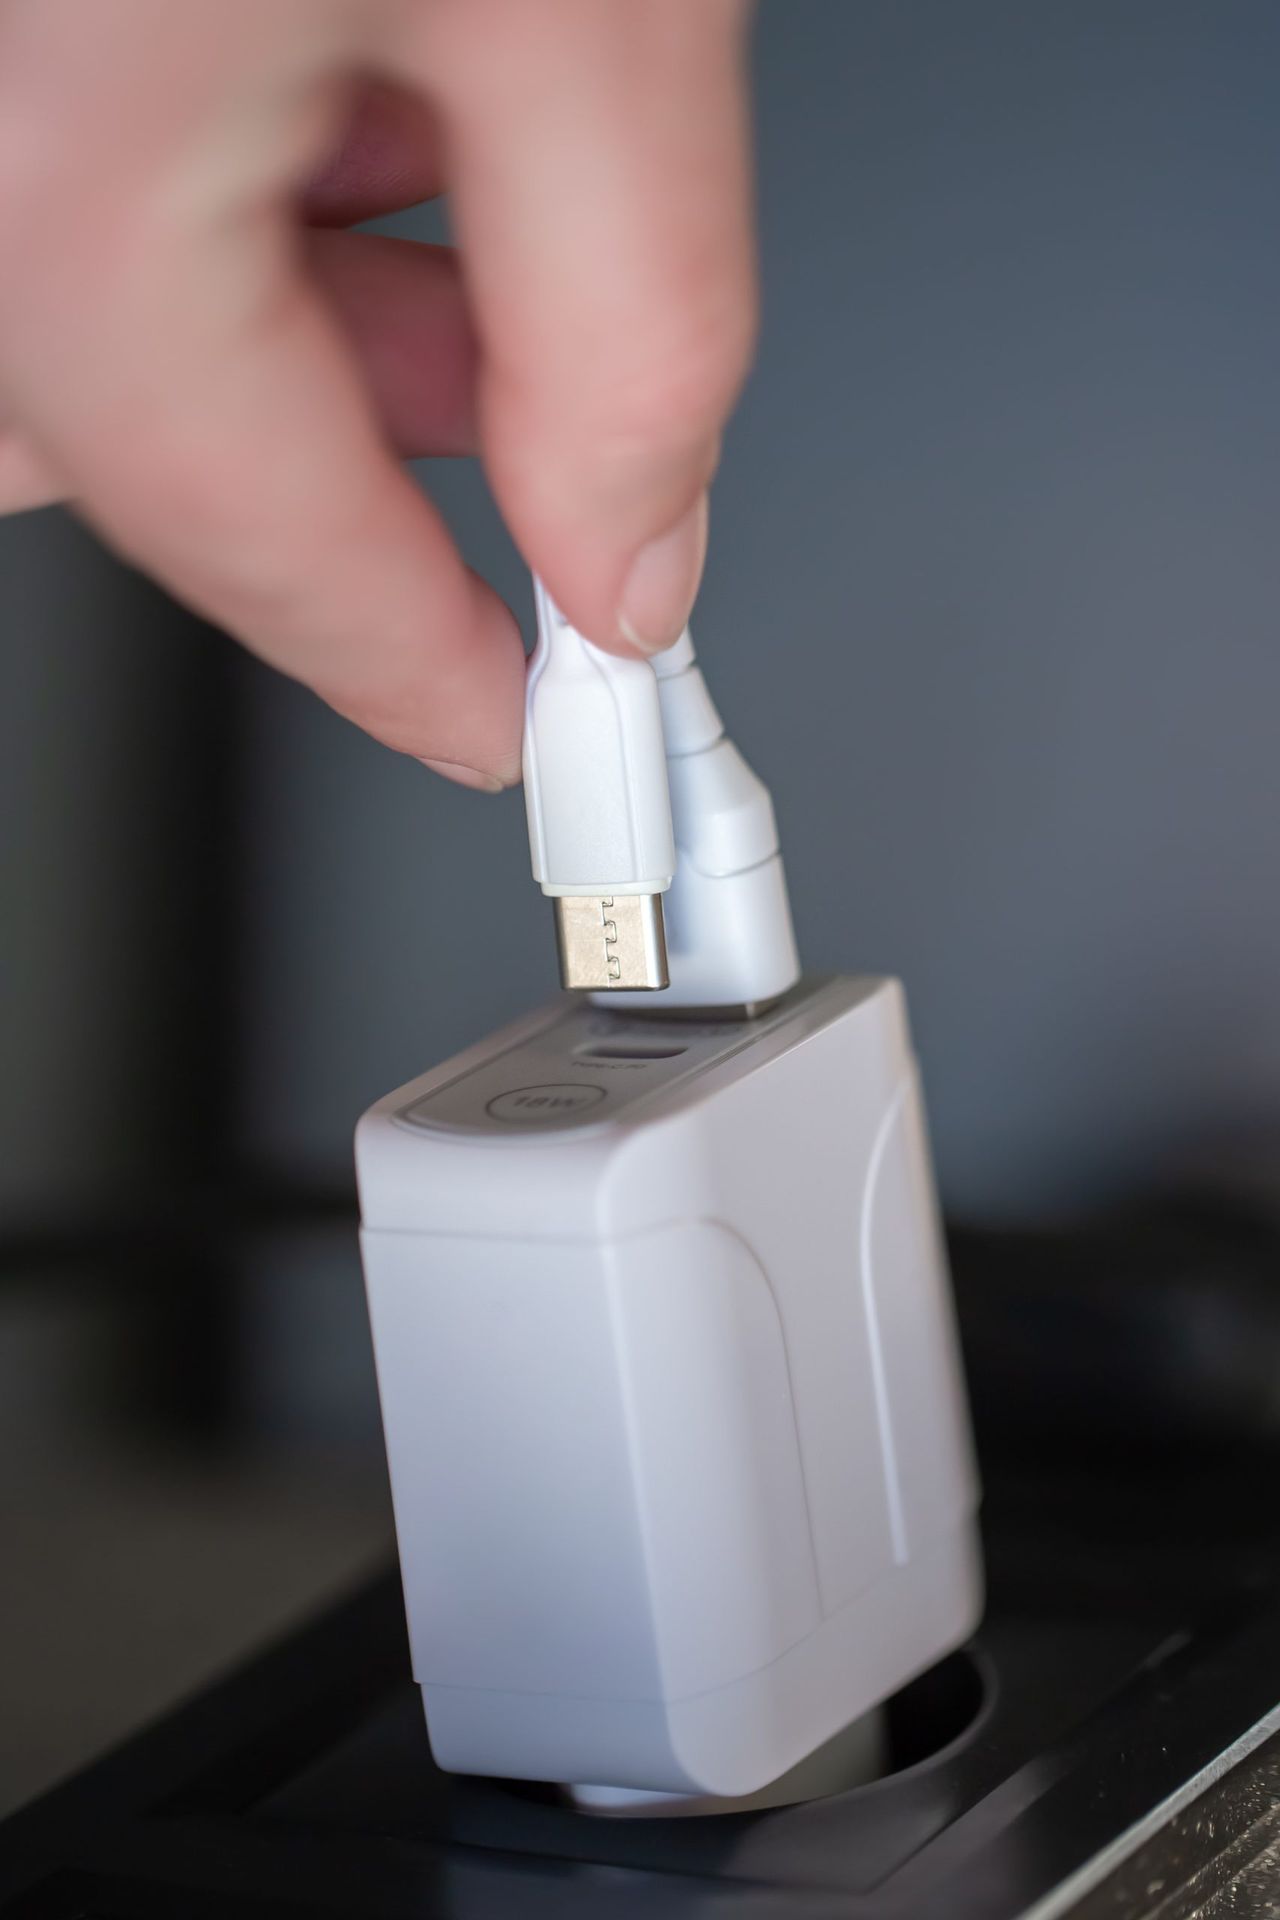 USB charging for gadgets on a blurred background of the room, close-up. The concept of technology in everyday life.